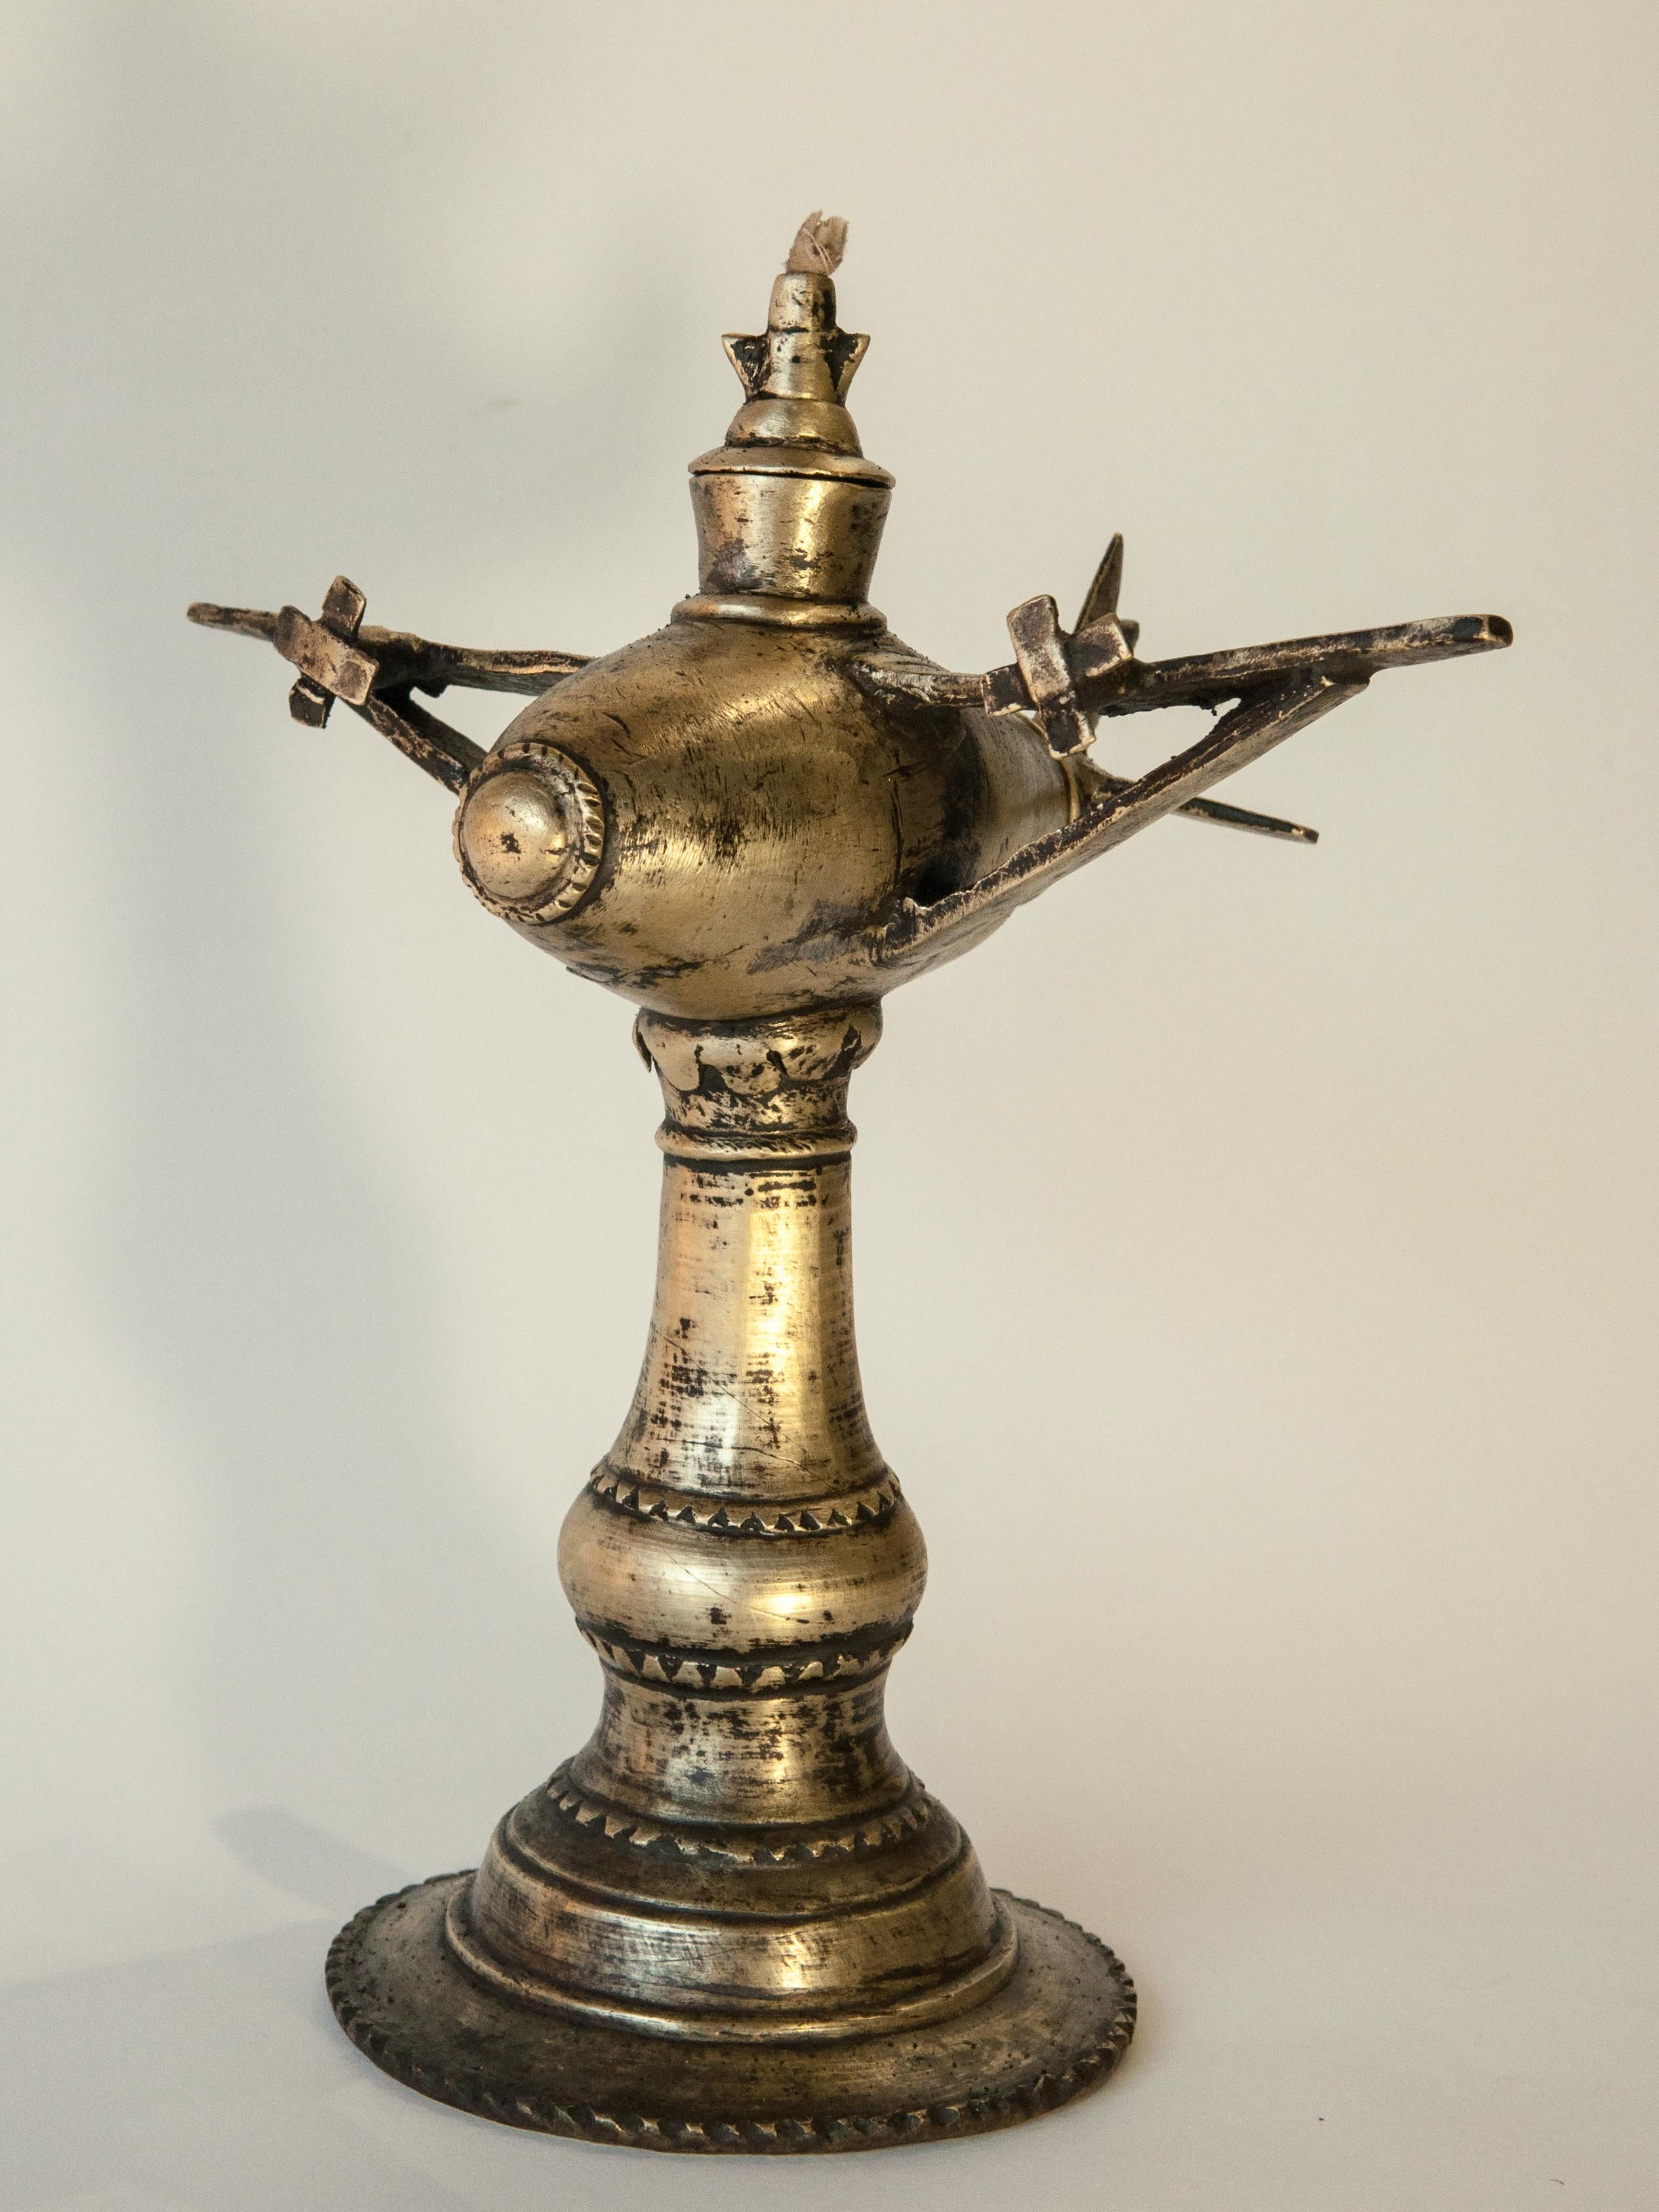 Hand-Crafted Vintage Bronze Oil Lamp Airplane Motif Rural Nepal, Mid-Late 20th Century